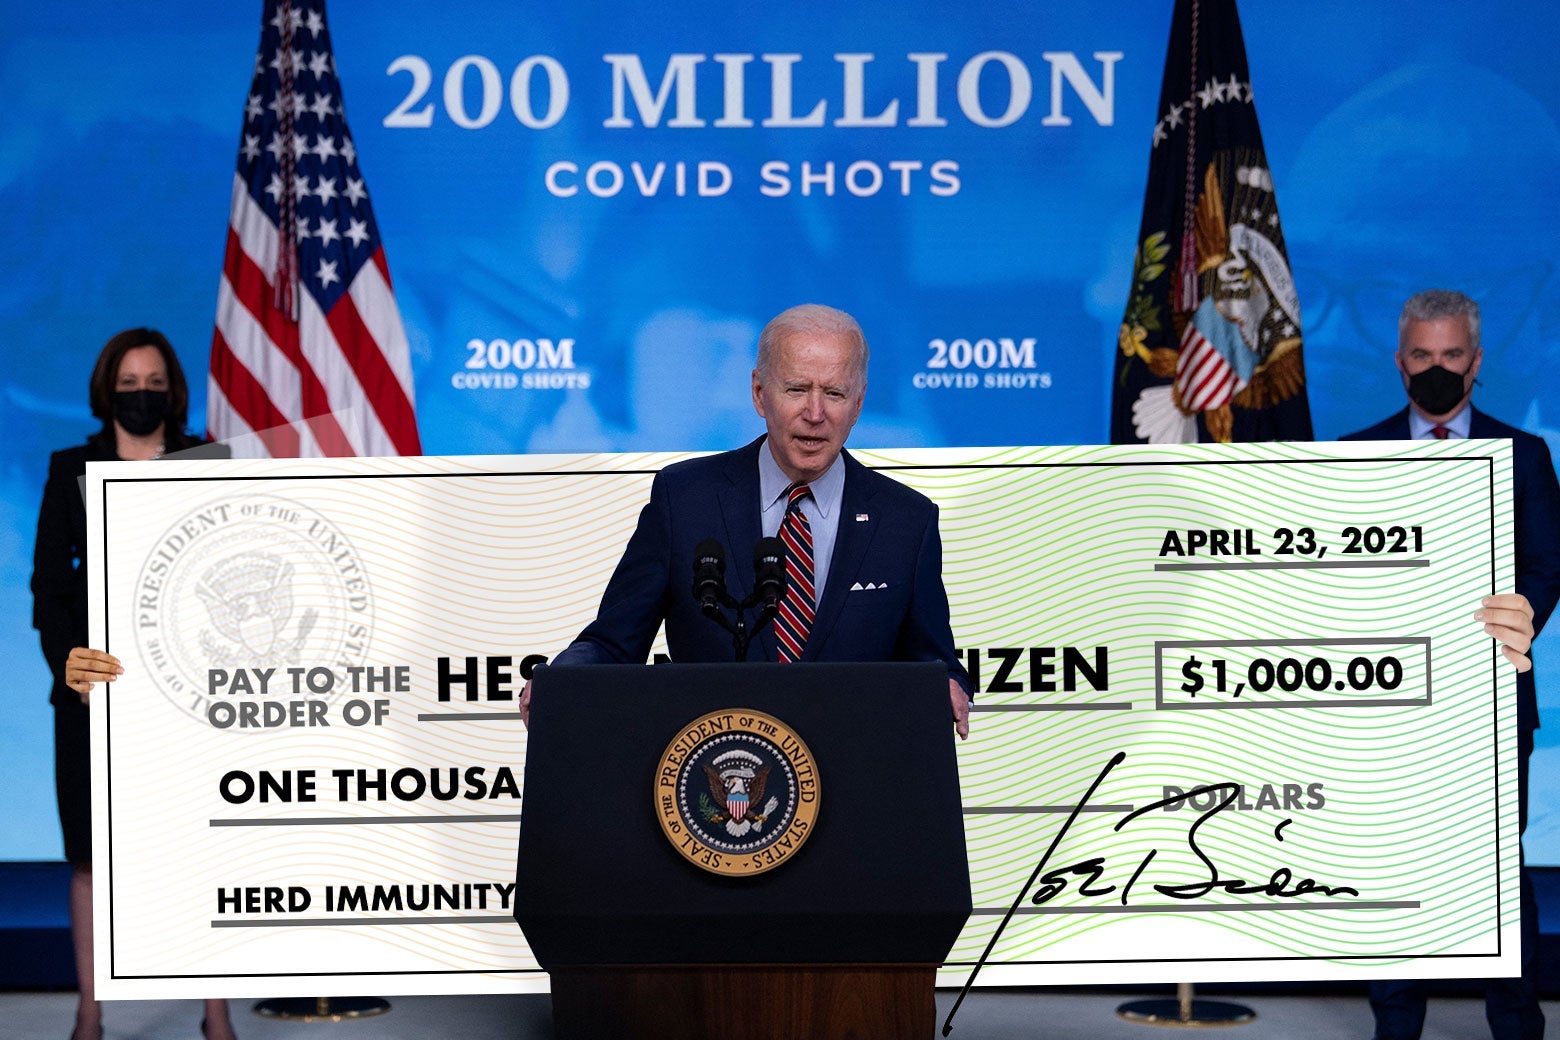 Joe Biden speaks in front of a 200 Million Covid Shots backdrop; a large novelty check for $1,000 to "Hesitant Citizen" with a memo line of "Herd Immunity" has been photoshopped behind him.